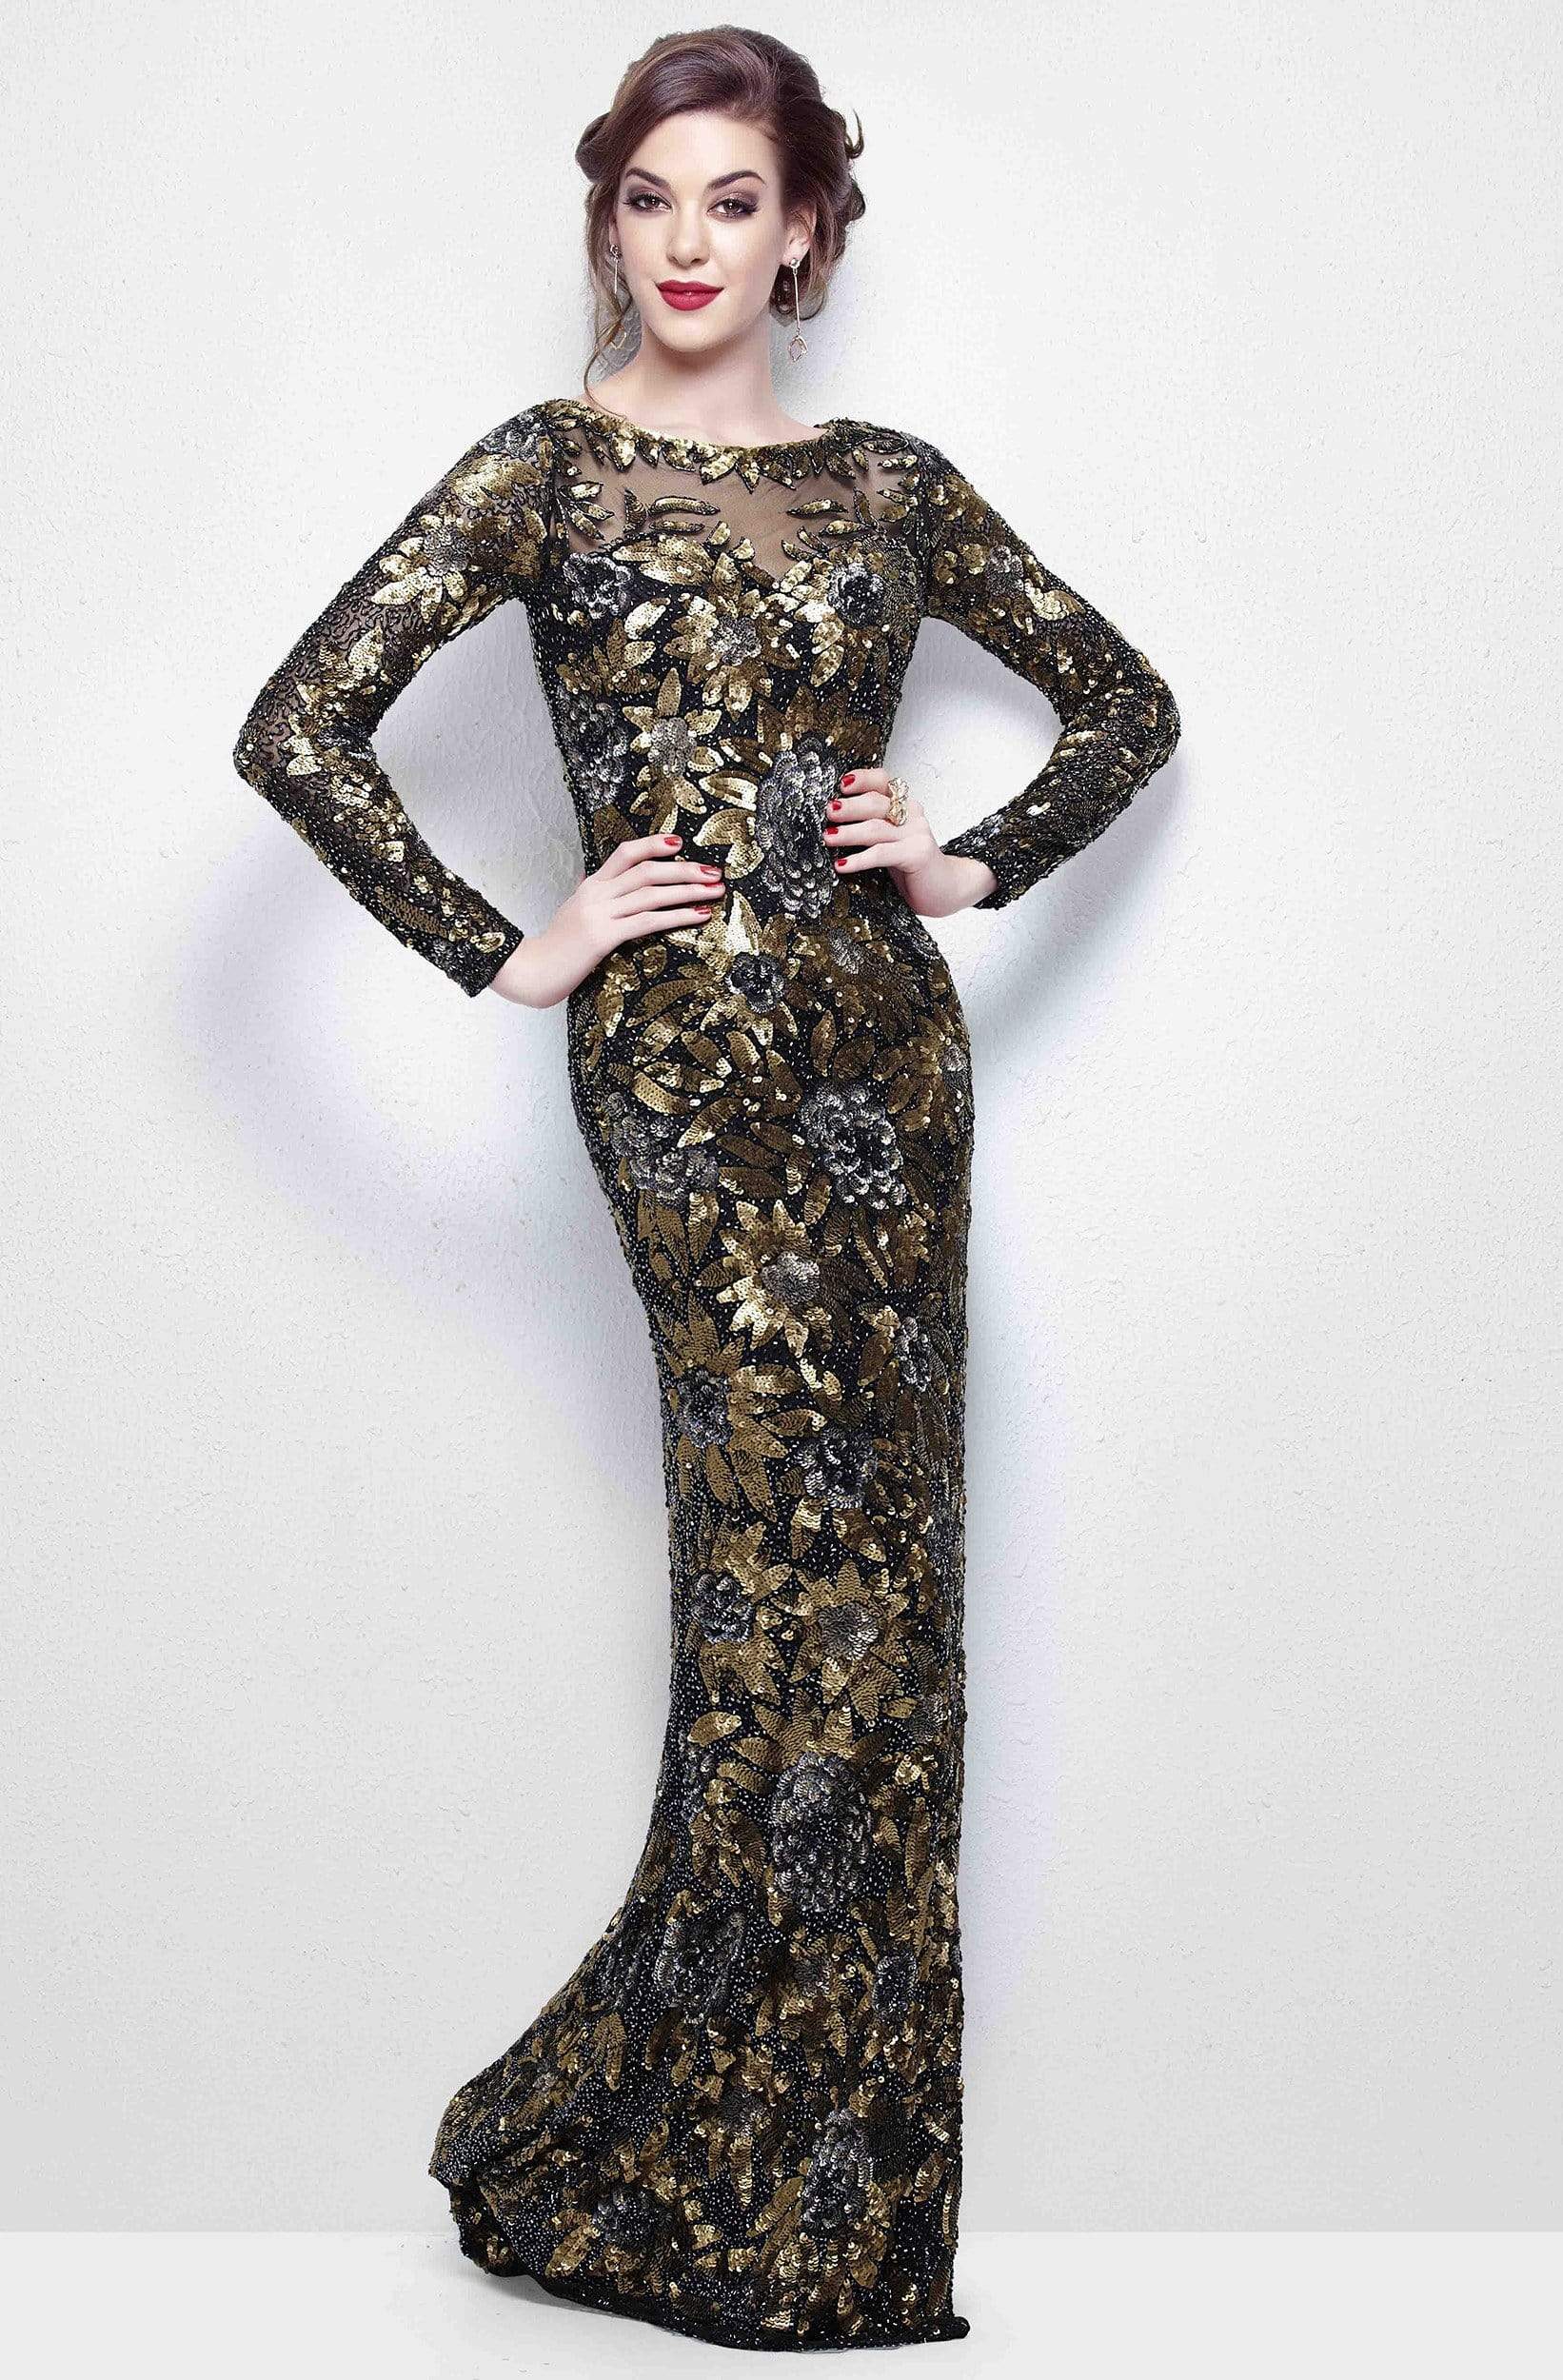 Image of Primavera Couture - Long Sleeve Luxurious Floral Sequined Long Sheath Gown 1401